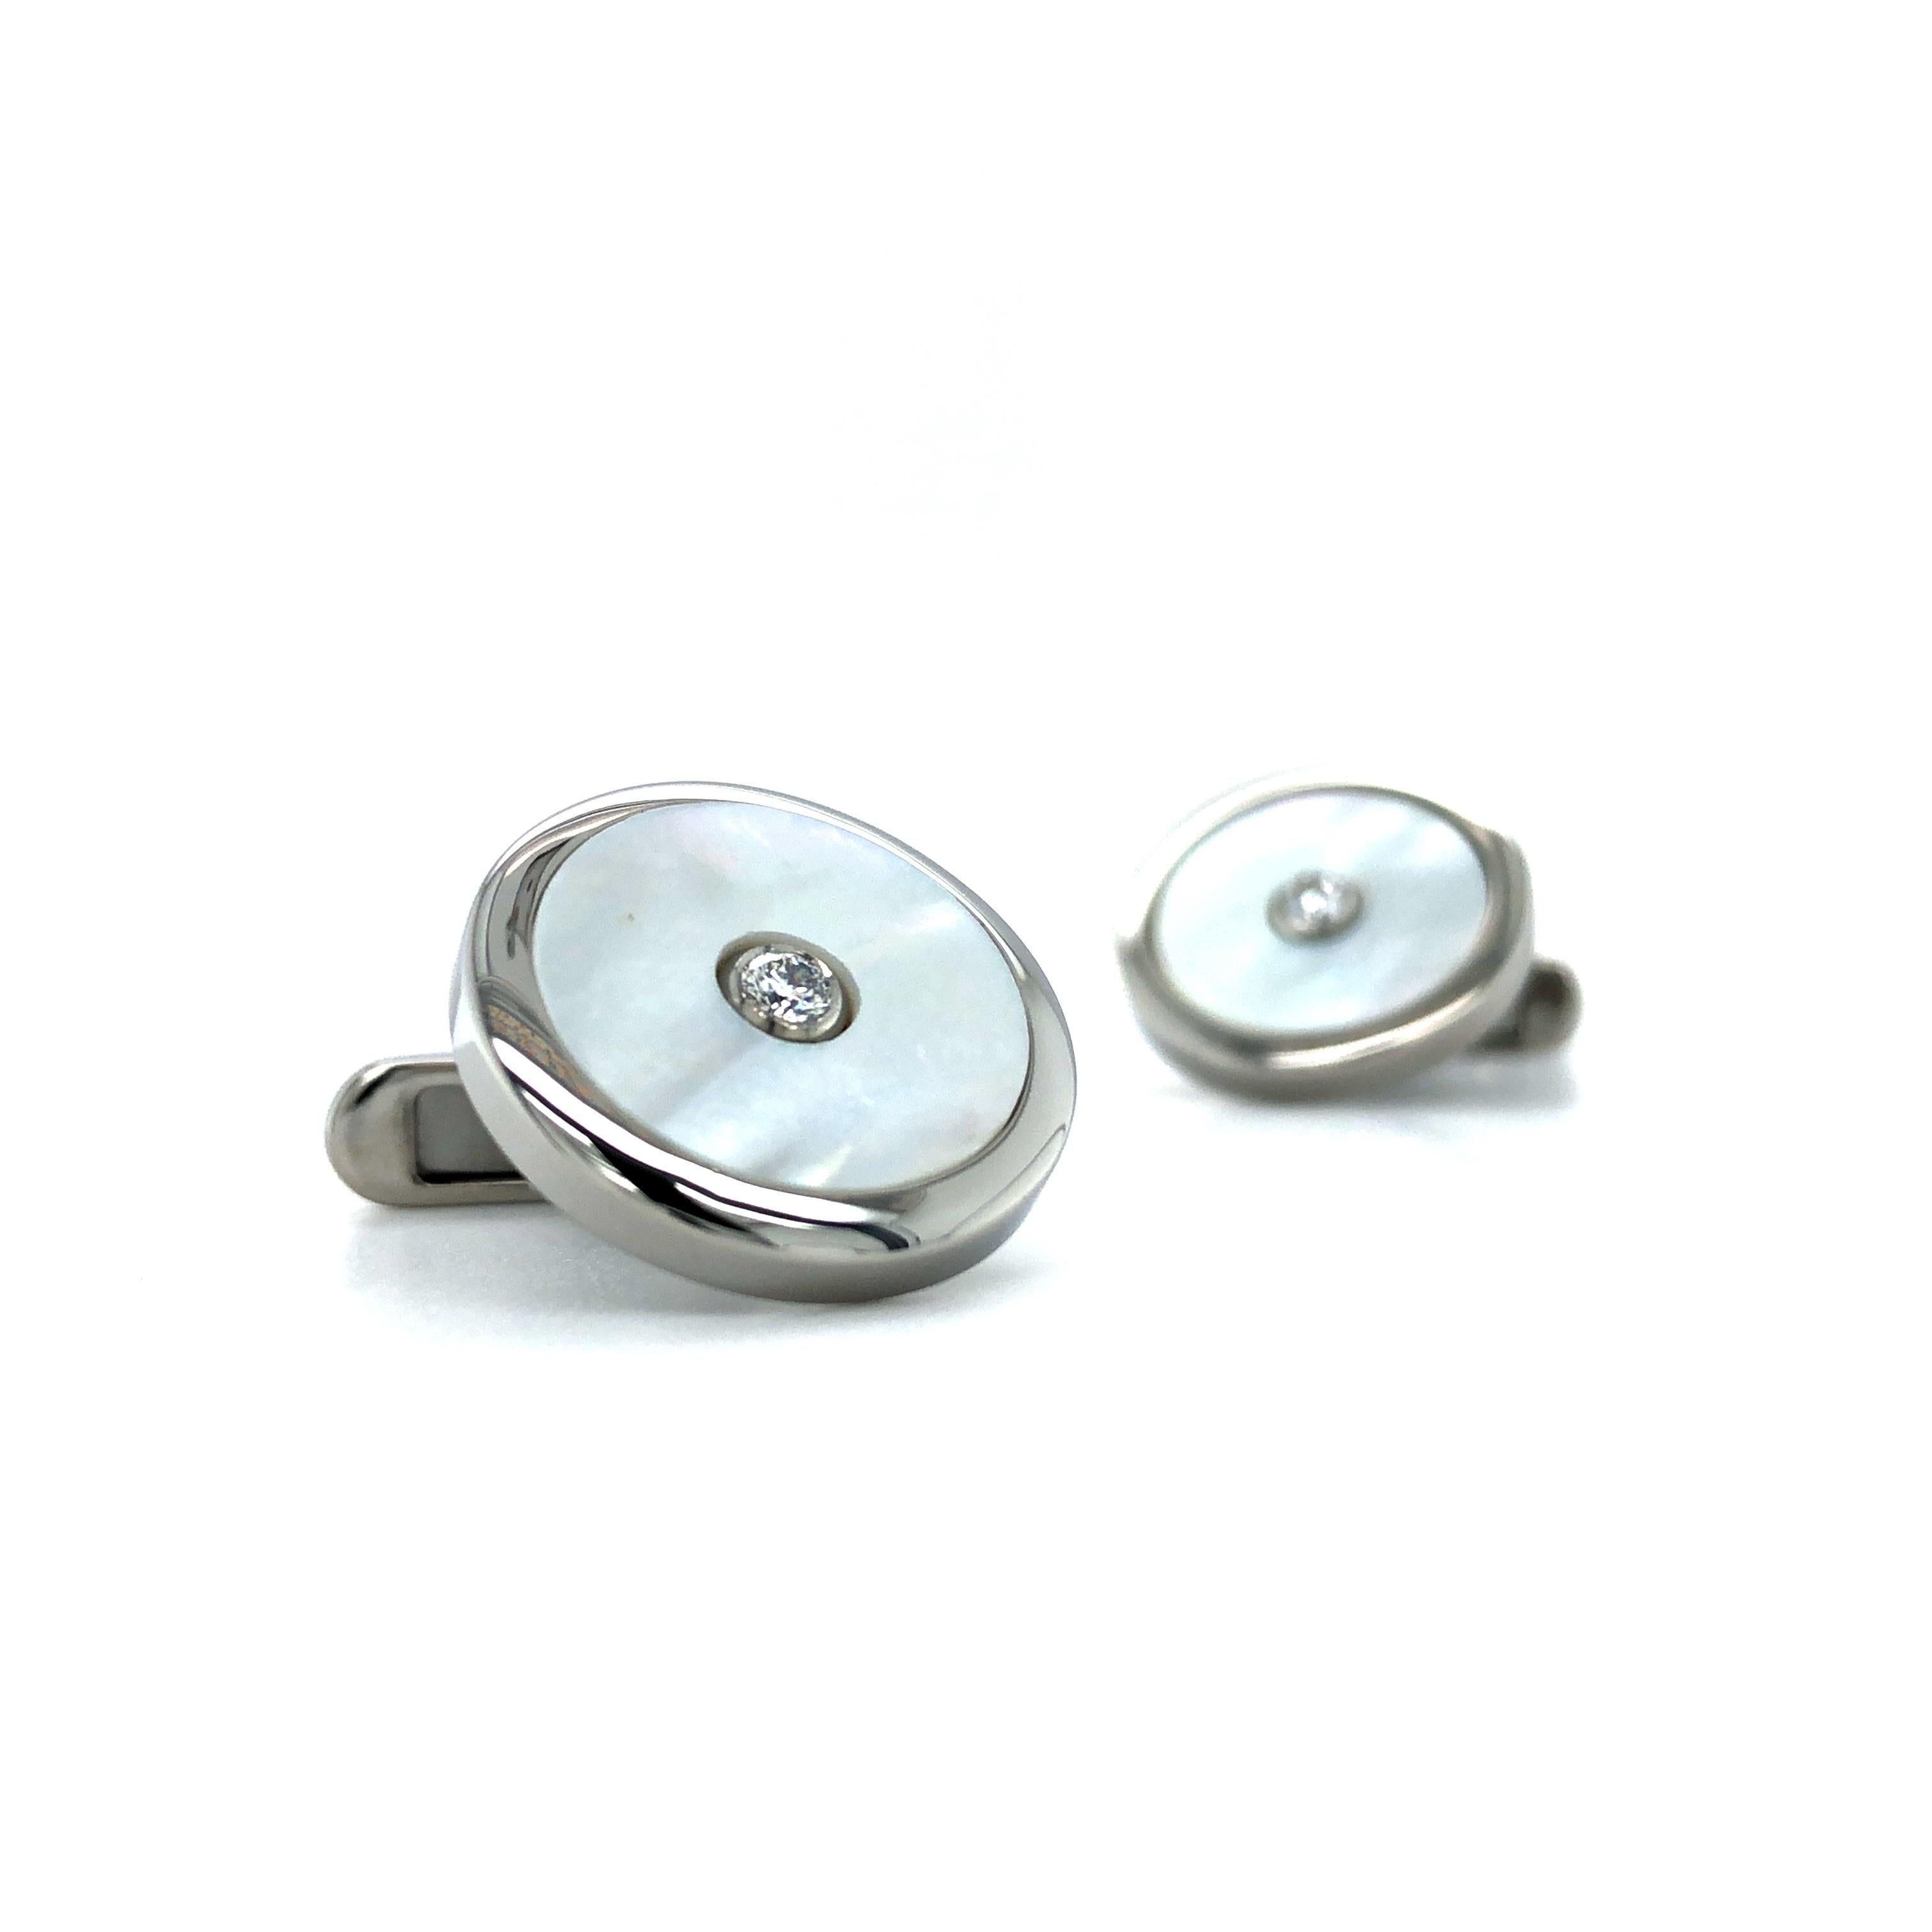 Contemporary Round Cufflinks Stainless Steel White Mother of Pearl Inlay - 2 Diamonds 0.2ct For Sale